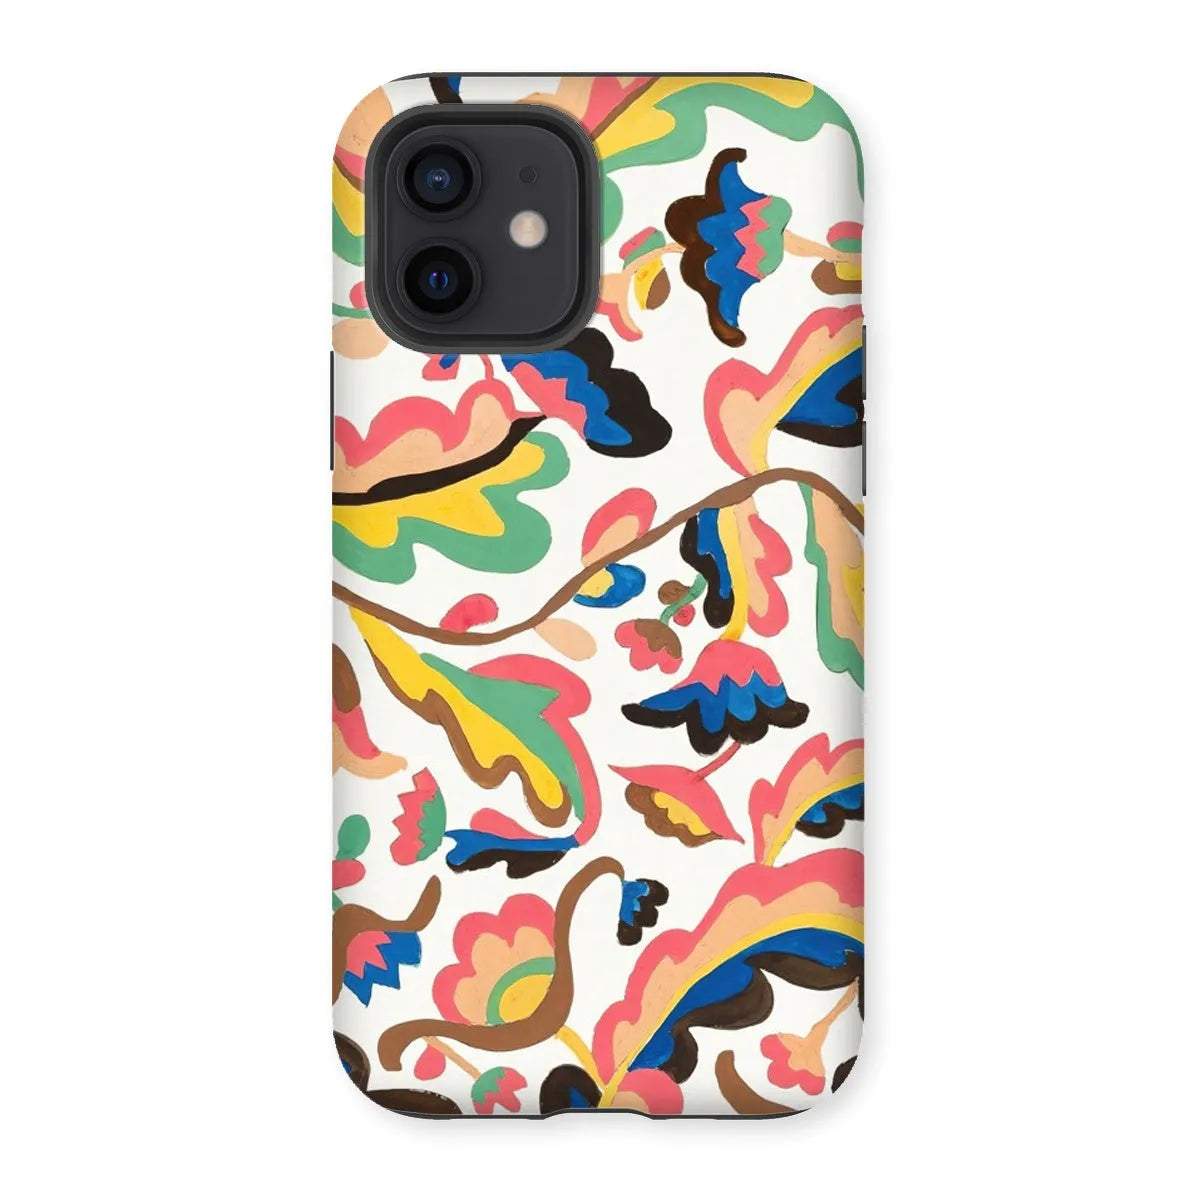 Colcha Floral Aesthetic Pattern Phone Case - Etna Wiswall - Iphone 12 / Matte - Mobile Phone Cases - Aesthetic Art